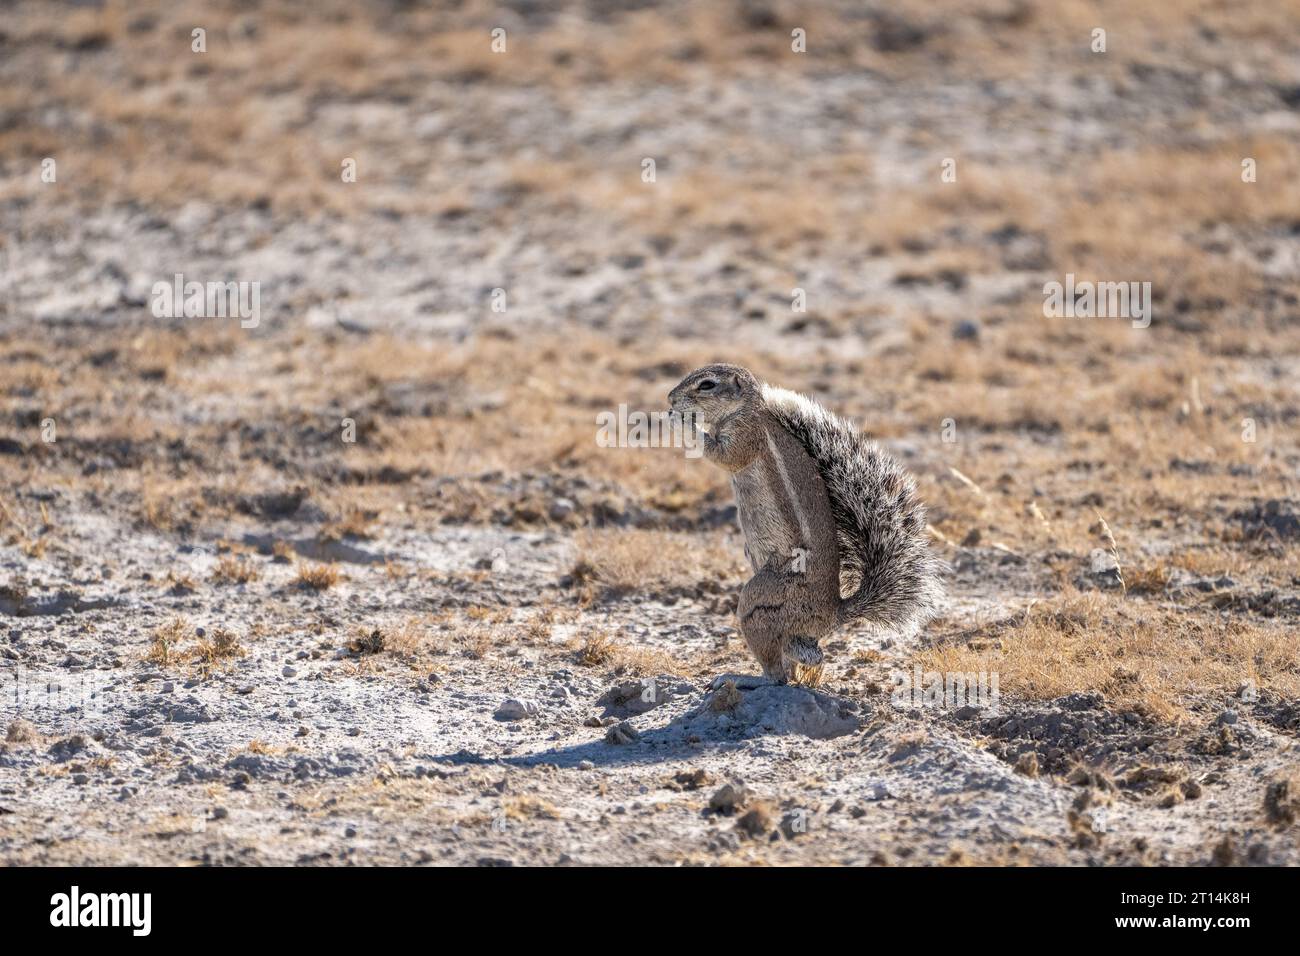 Cape ground squirrel (Xerus inauris) standing on its hind legs. This rodent lives in open arid areas of southern Africa. It is a social animal living Stock Photo